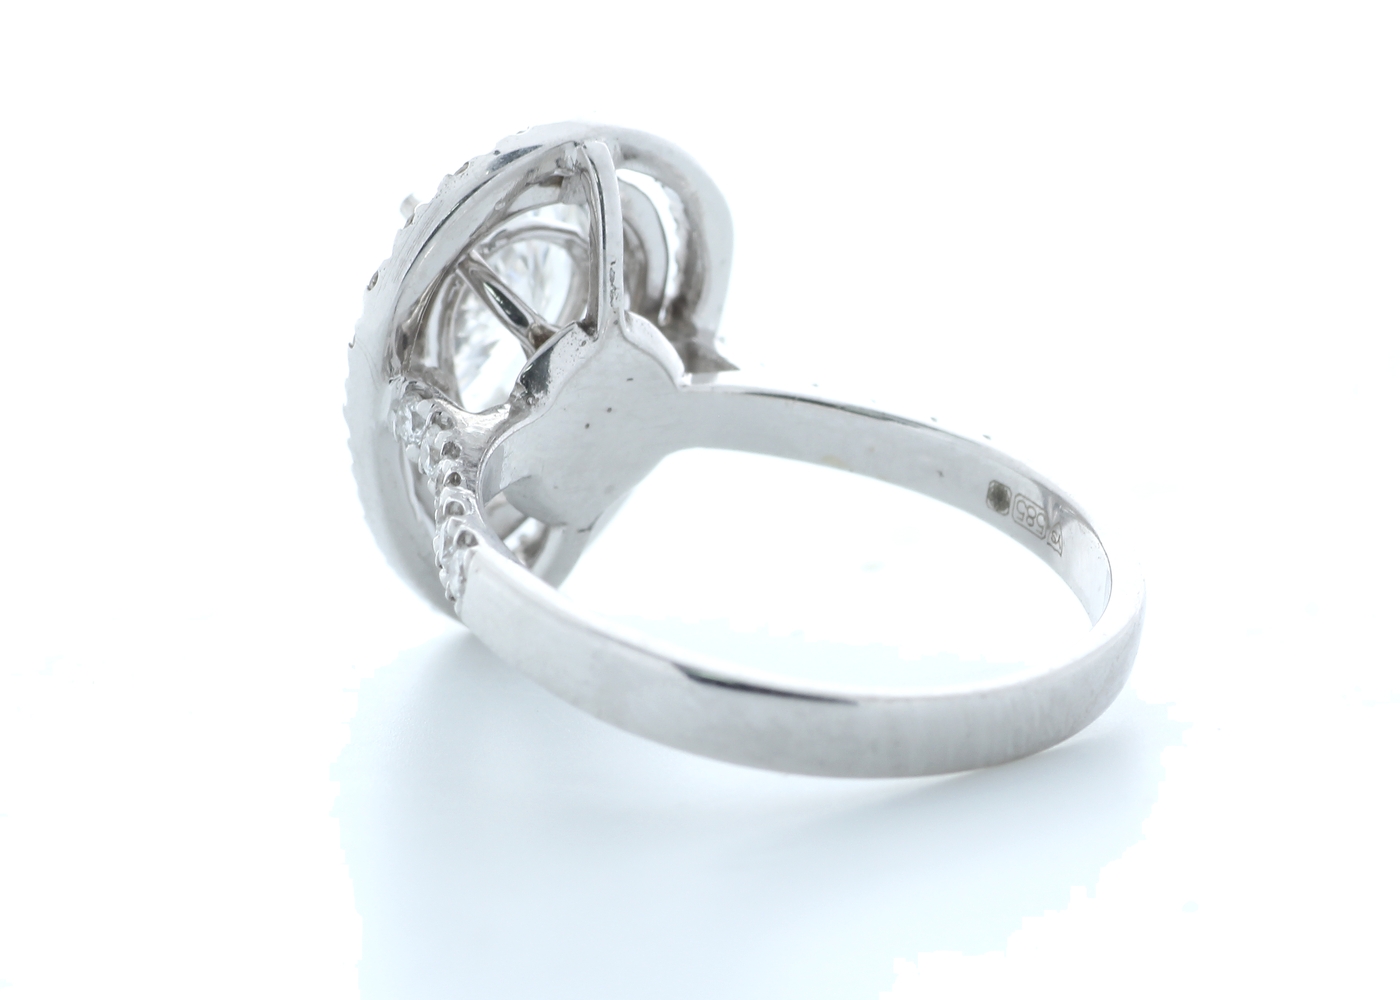 18ct White Gold Single Stone With Halo Setting Ring 1.71 (1.27) Carats - Image 3 of 5